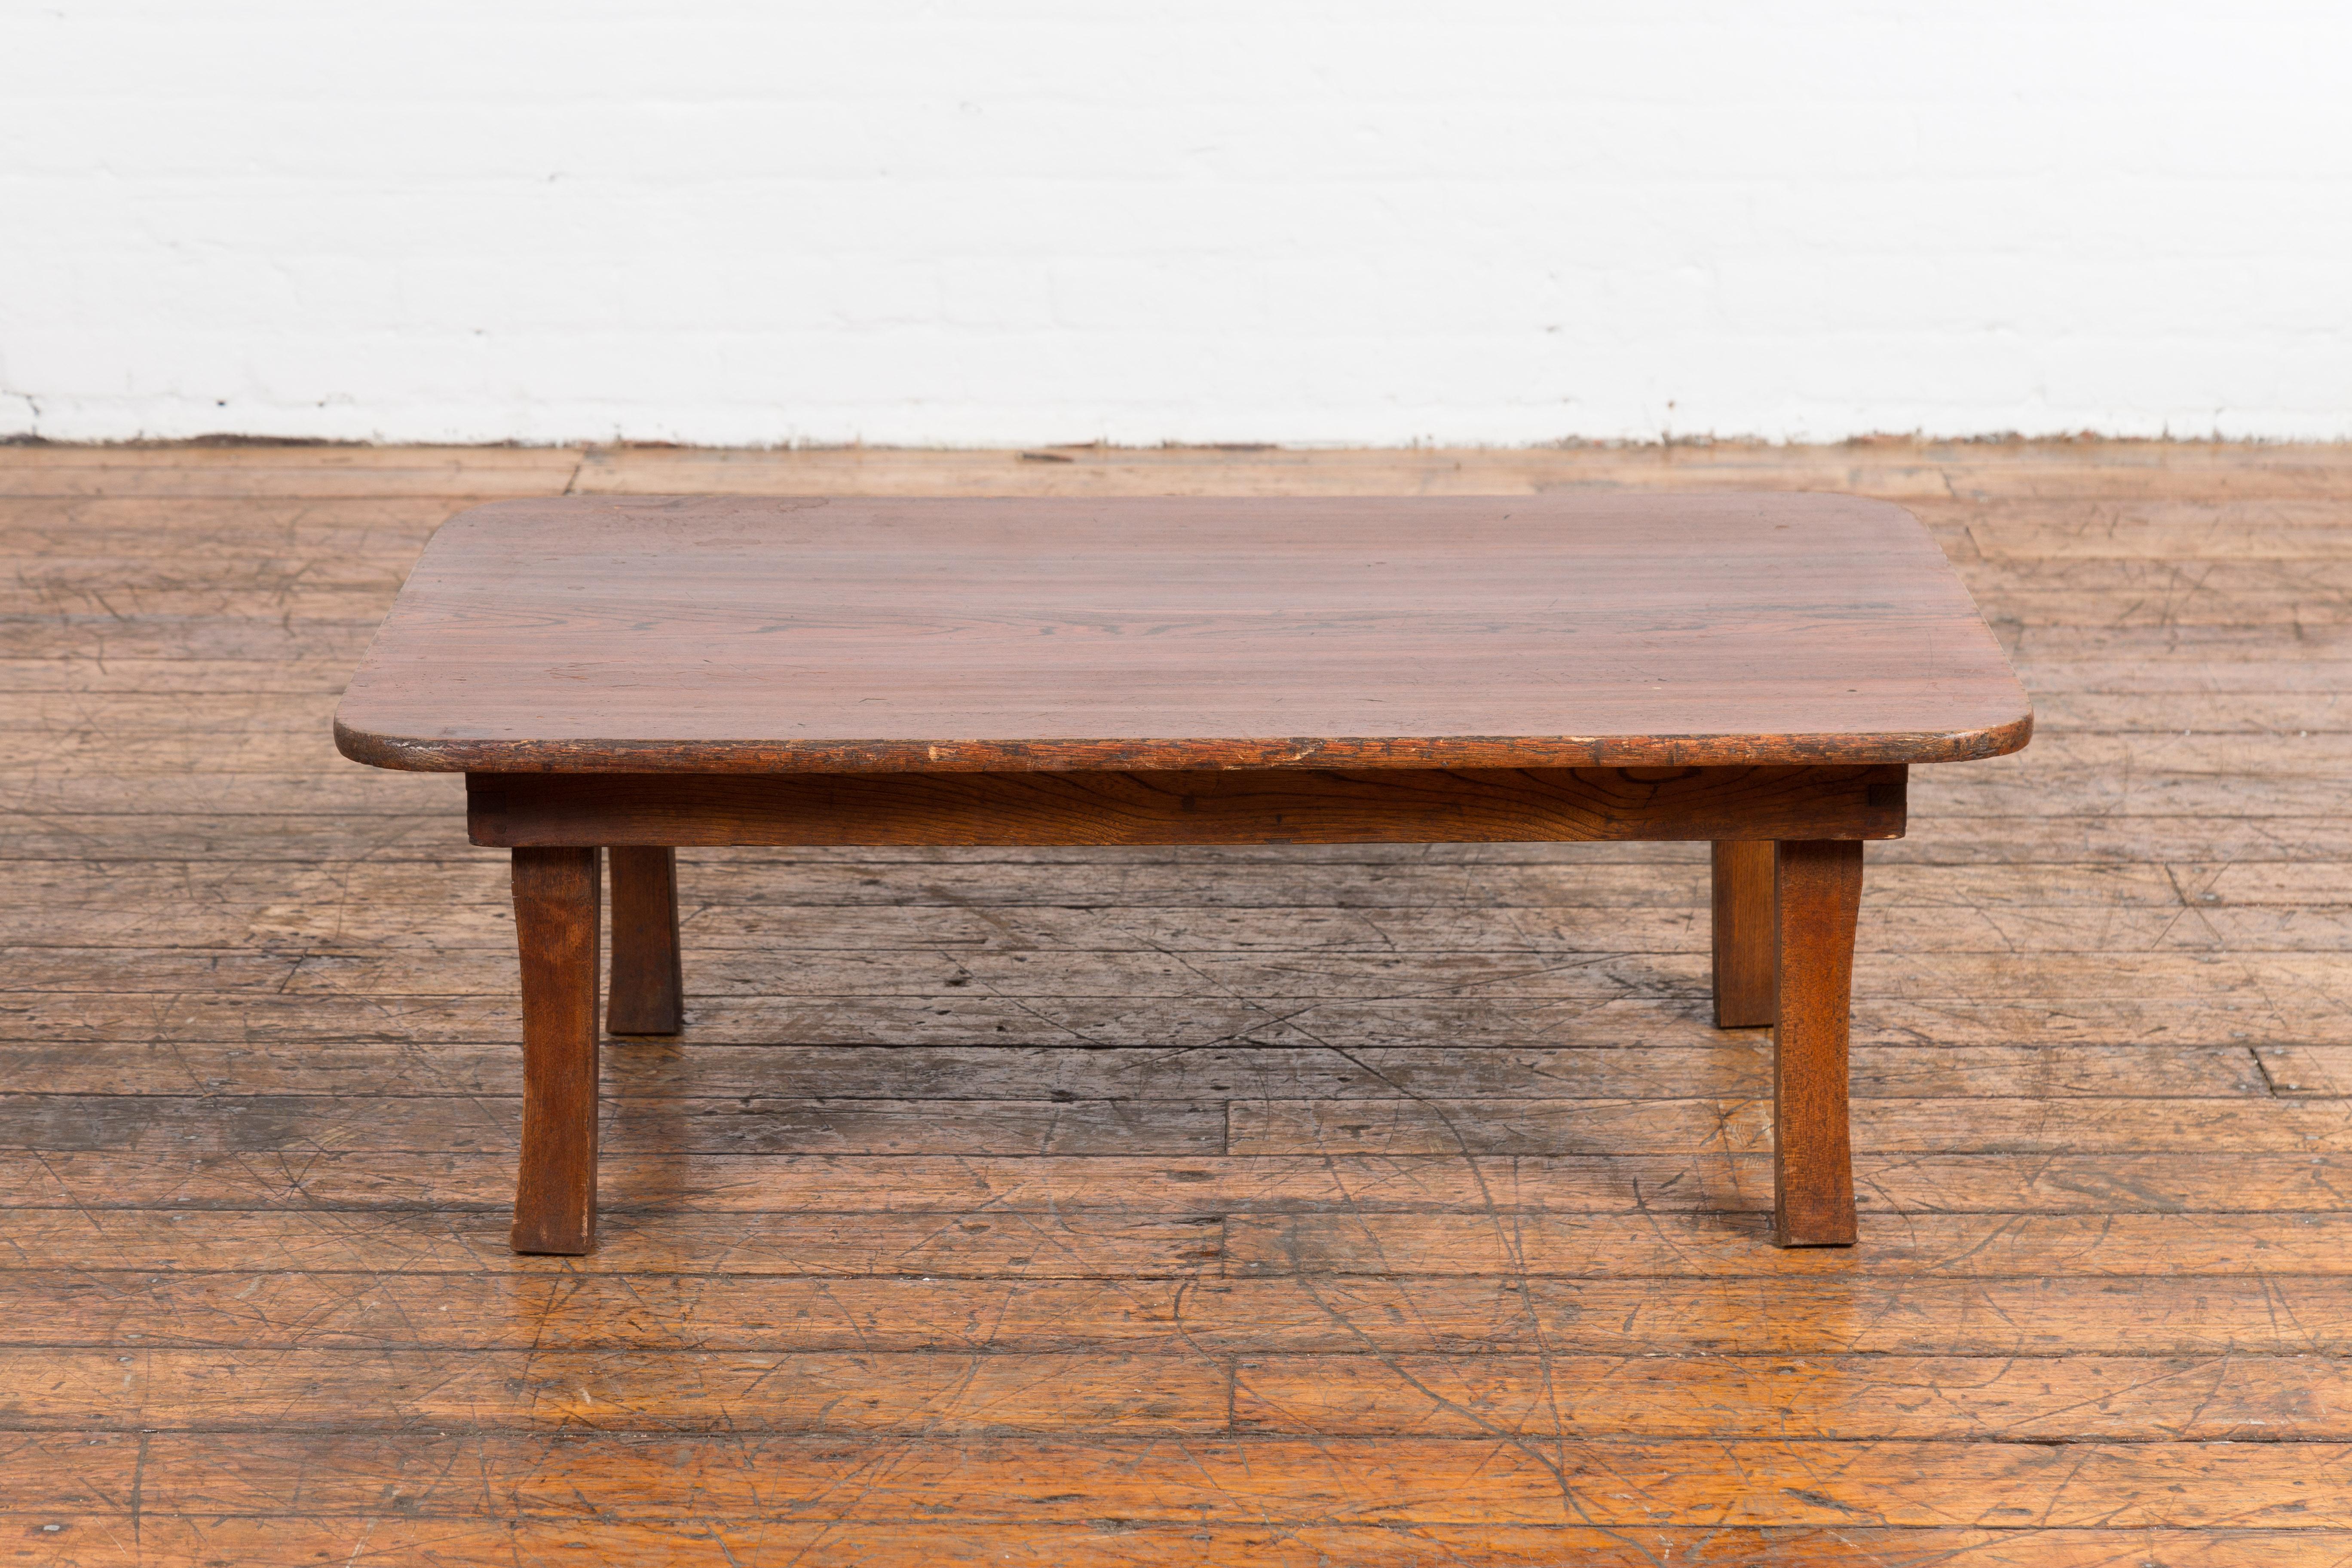 An antique Japanese low table from the 19th century with folding legs. Introduce a touch of elegance to your living space with this exquisite antique Japanese low table from the 19th century. Designed to serve as a drinks or coffee table, this piece